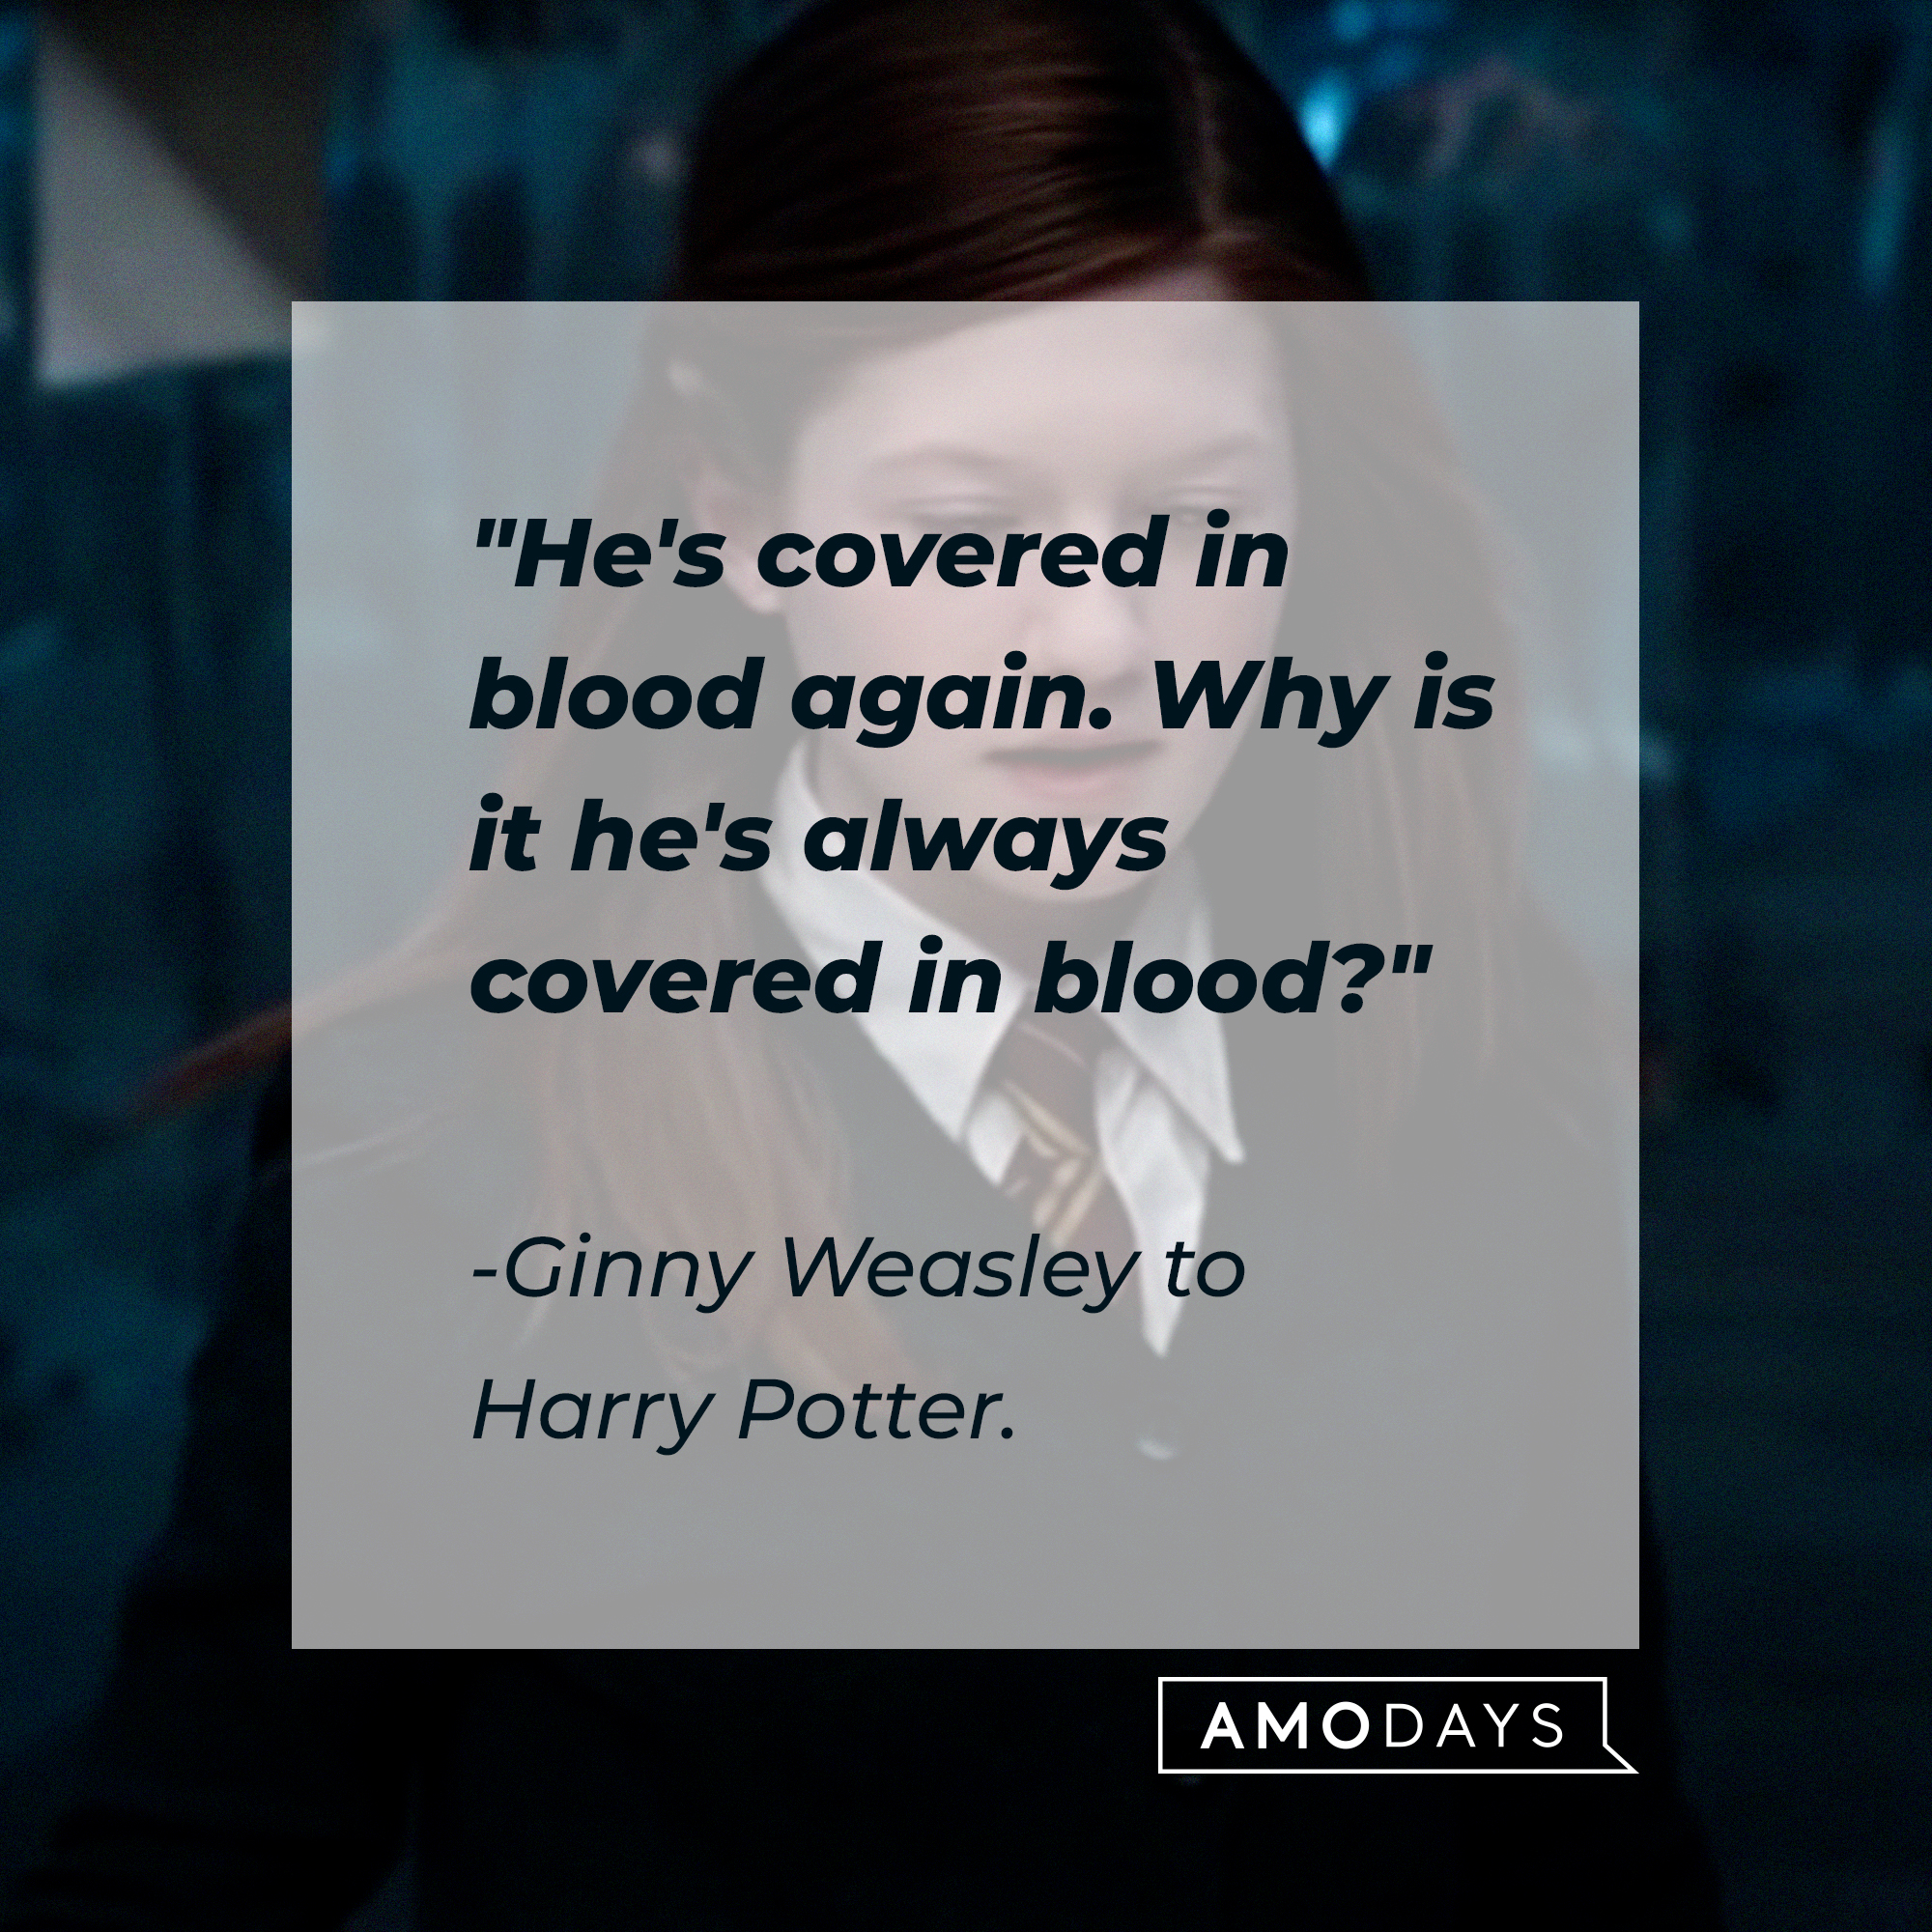 Ginny Weasley’s quote:  "He's covered in blood again. Why is it he's always covered in blood? " | Image: Youtube.com/harrypotter